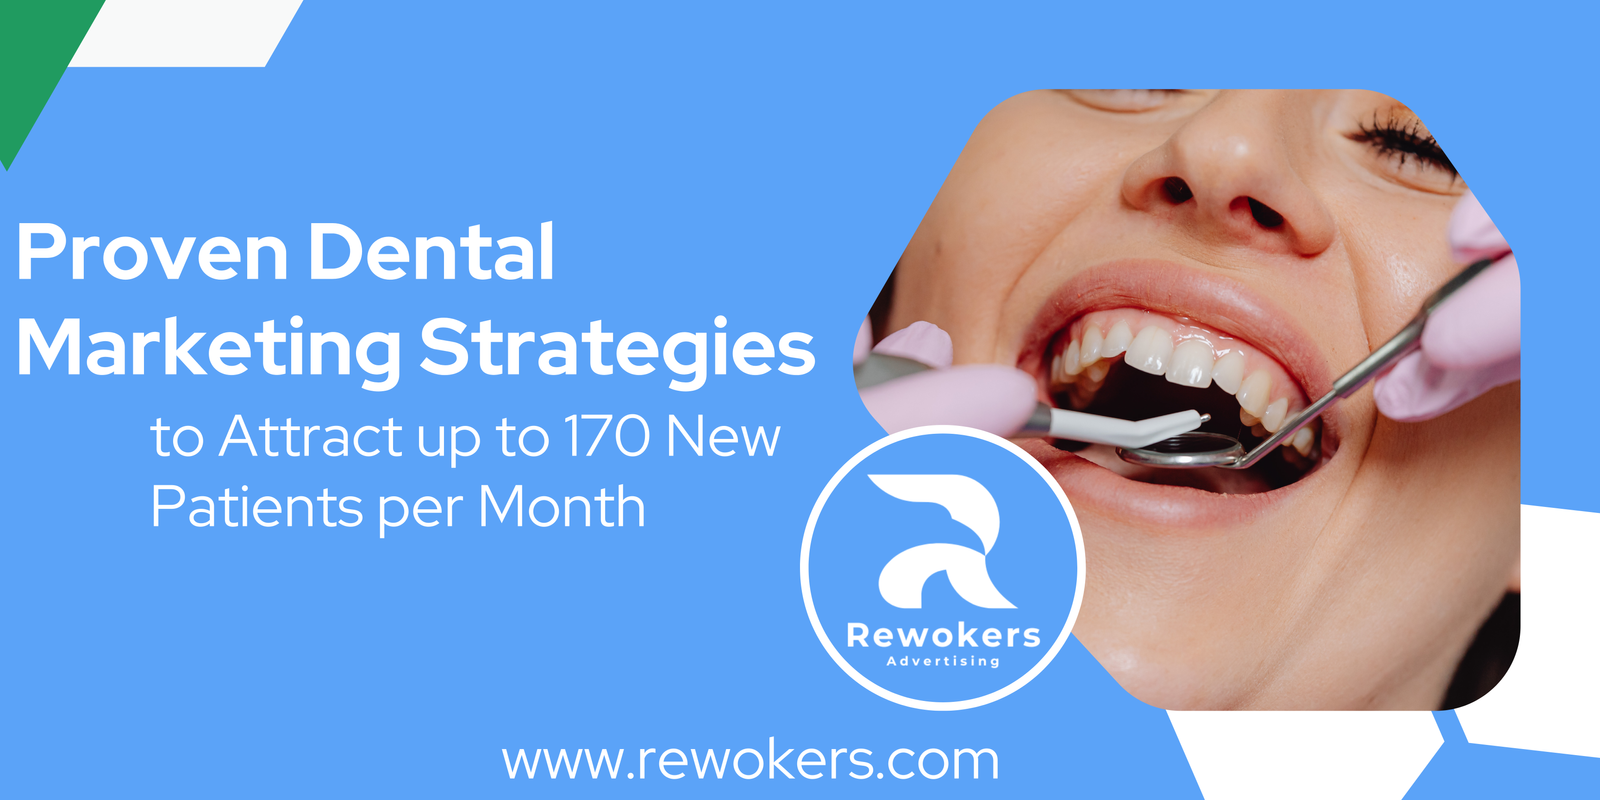 7 Proven Dental Marketing Strategies to Attract up to 170 New Patients per Month